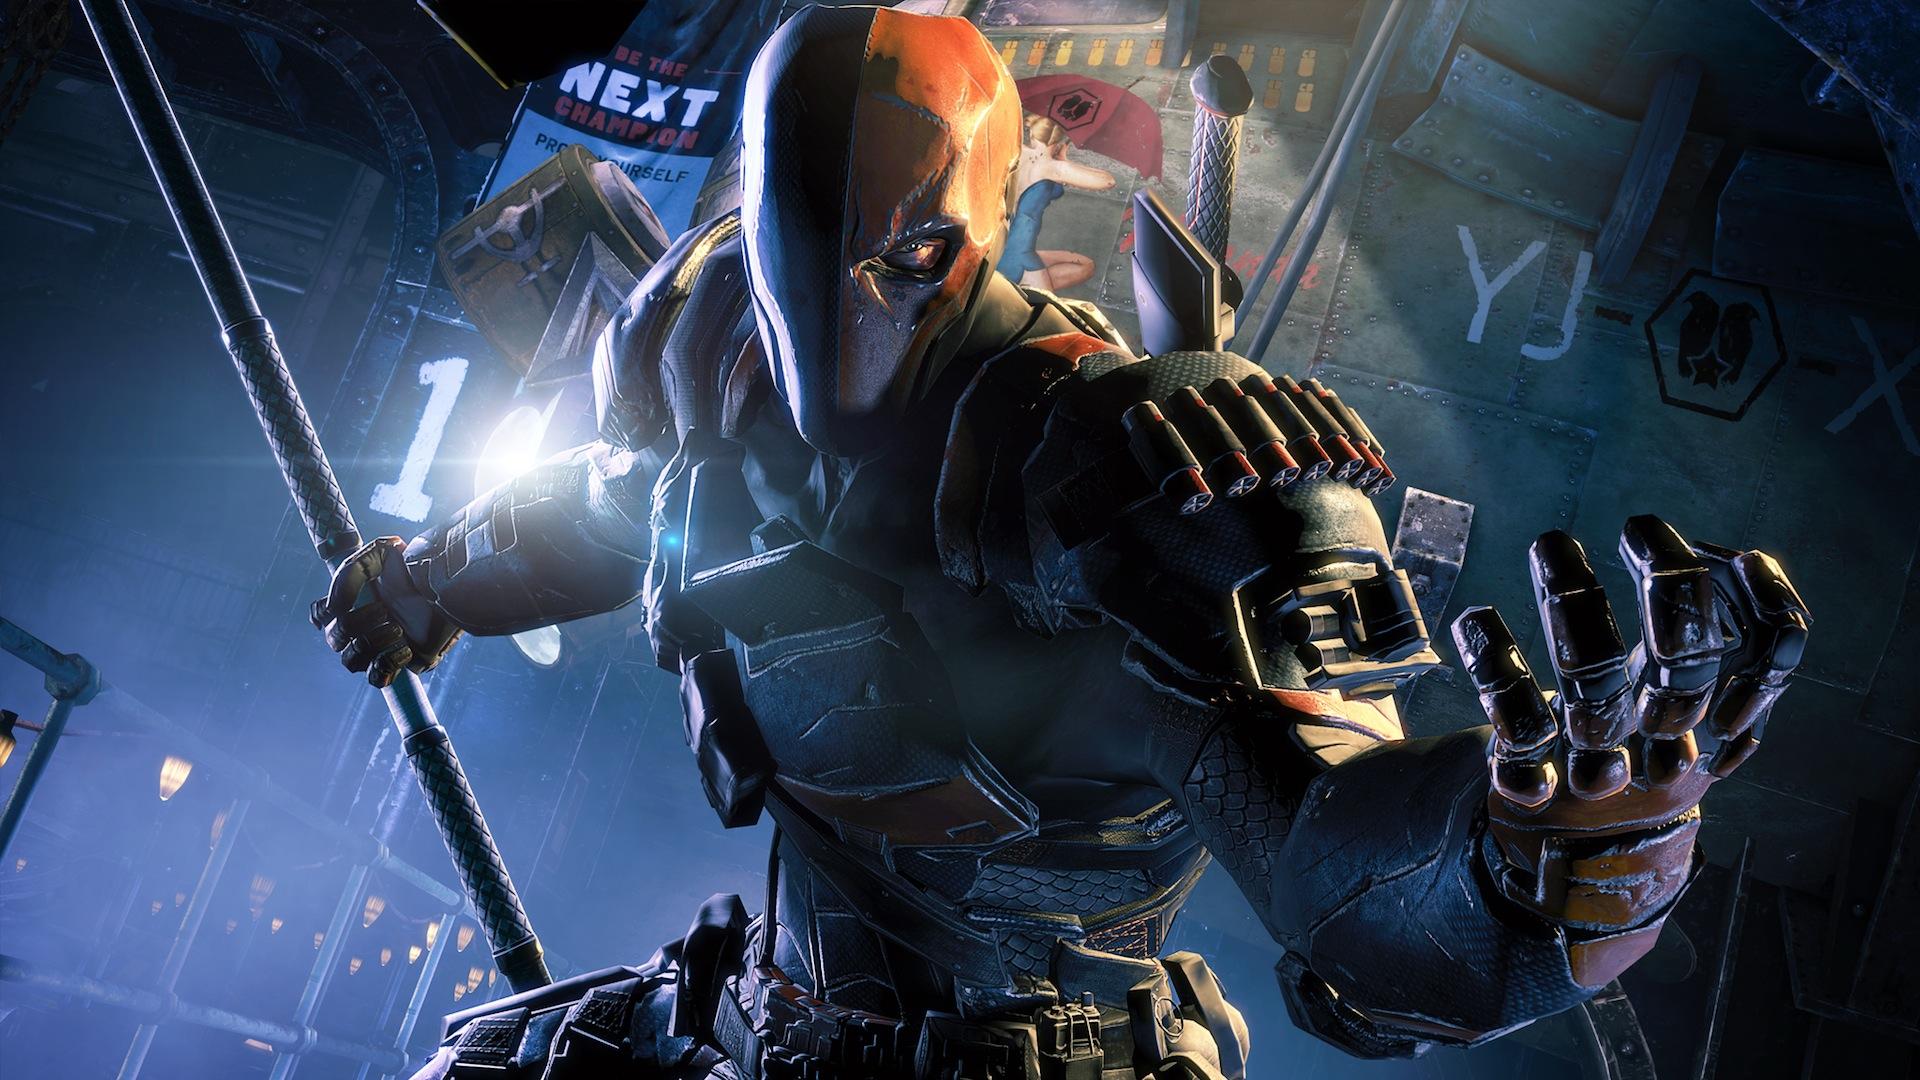 Batman: Arkham Origins hands-on with the Deathstroke fight